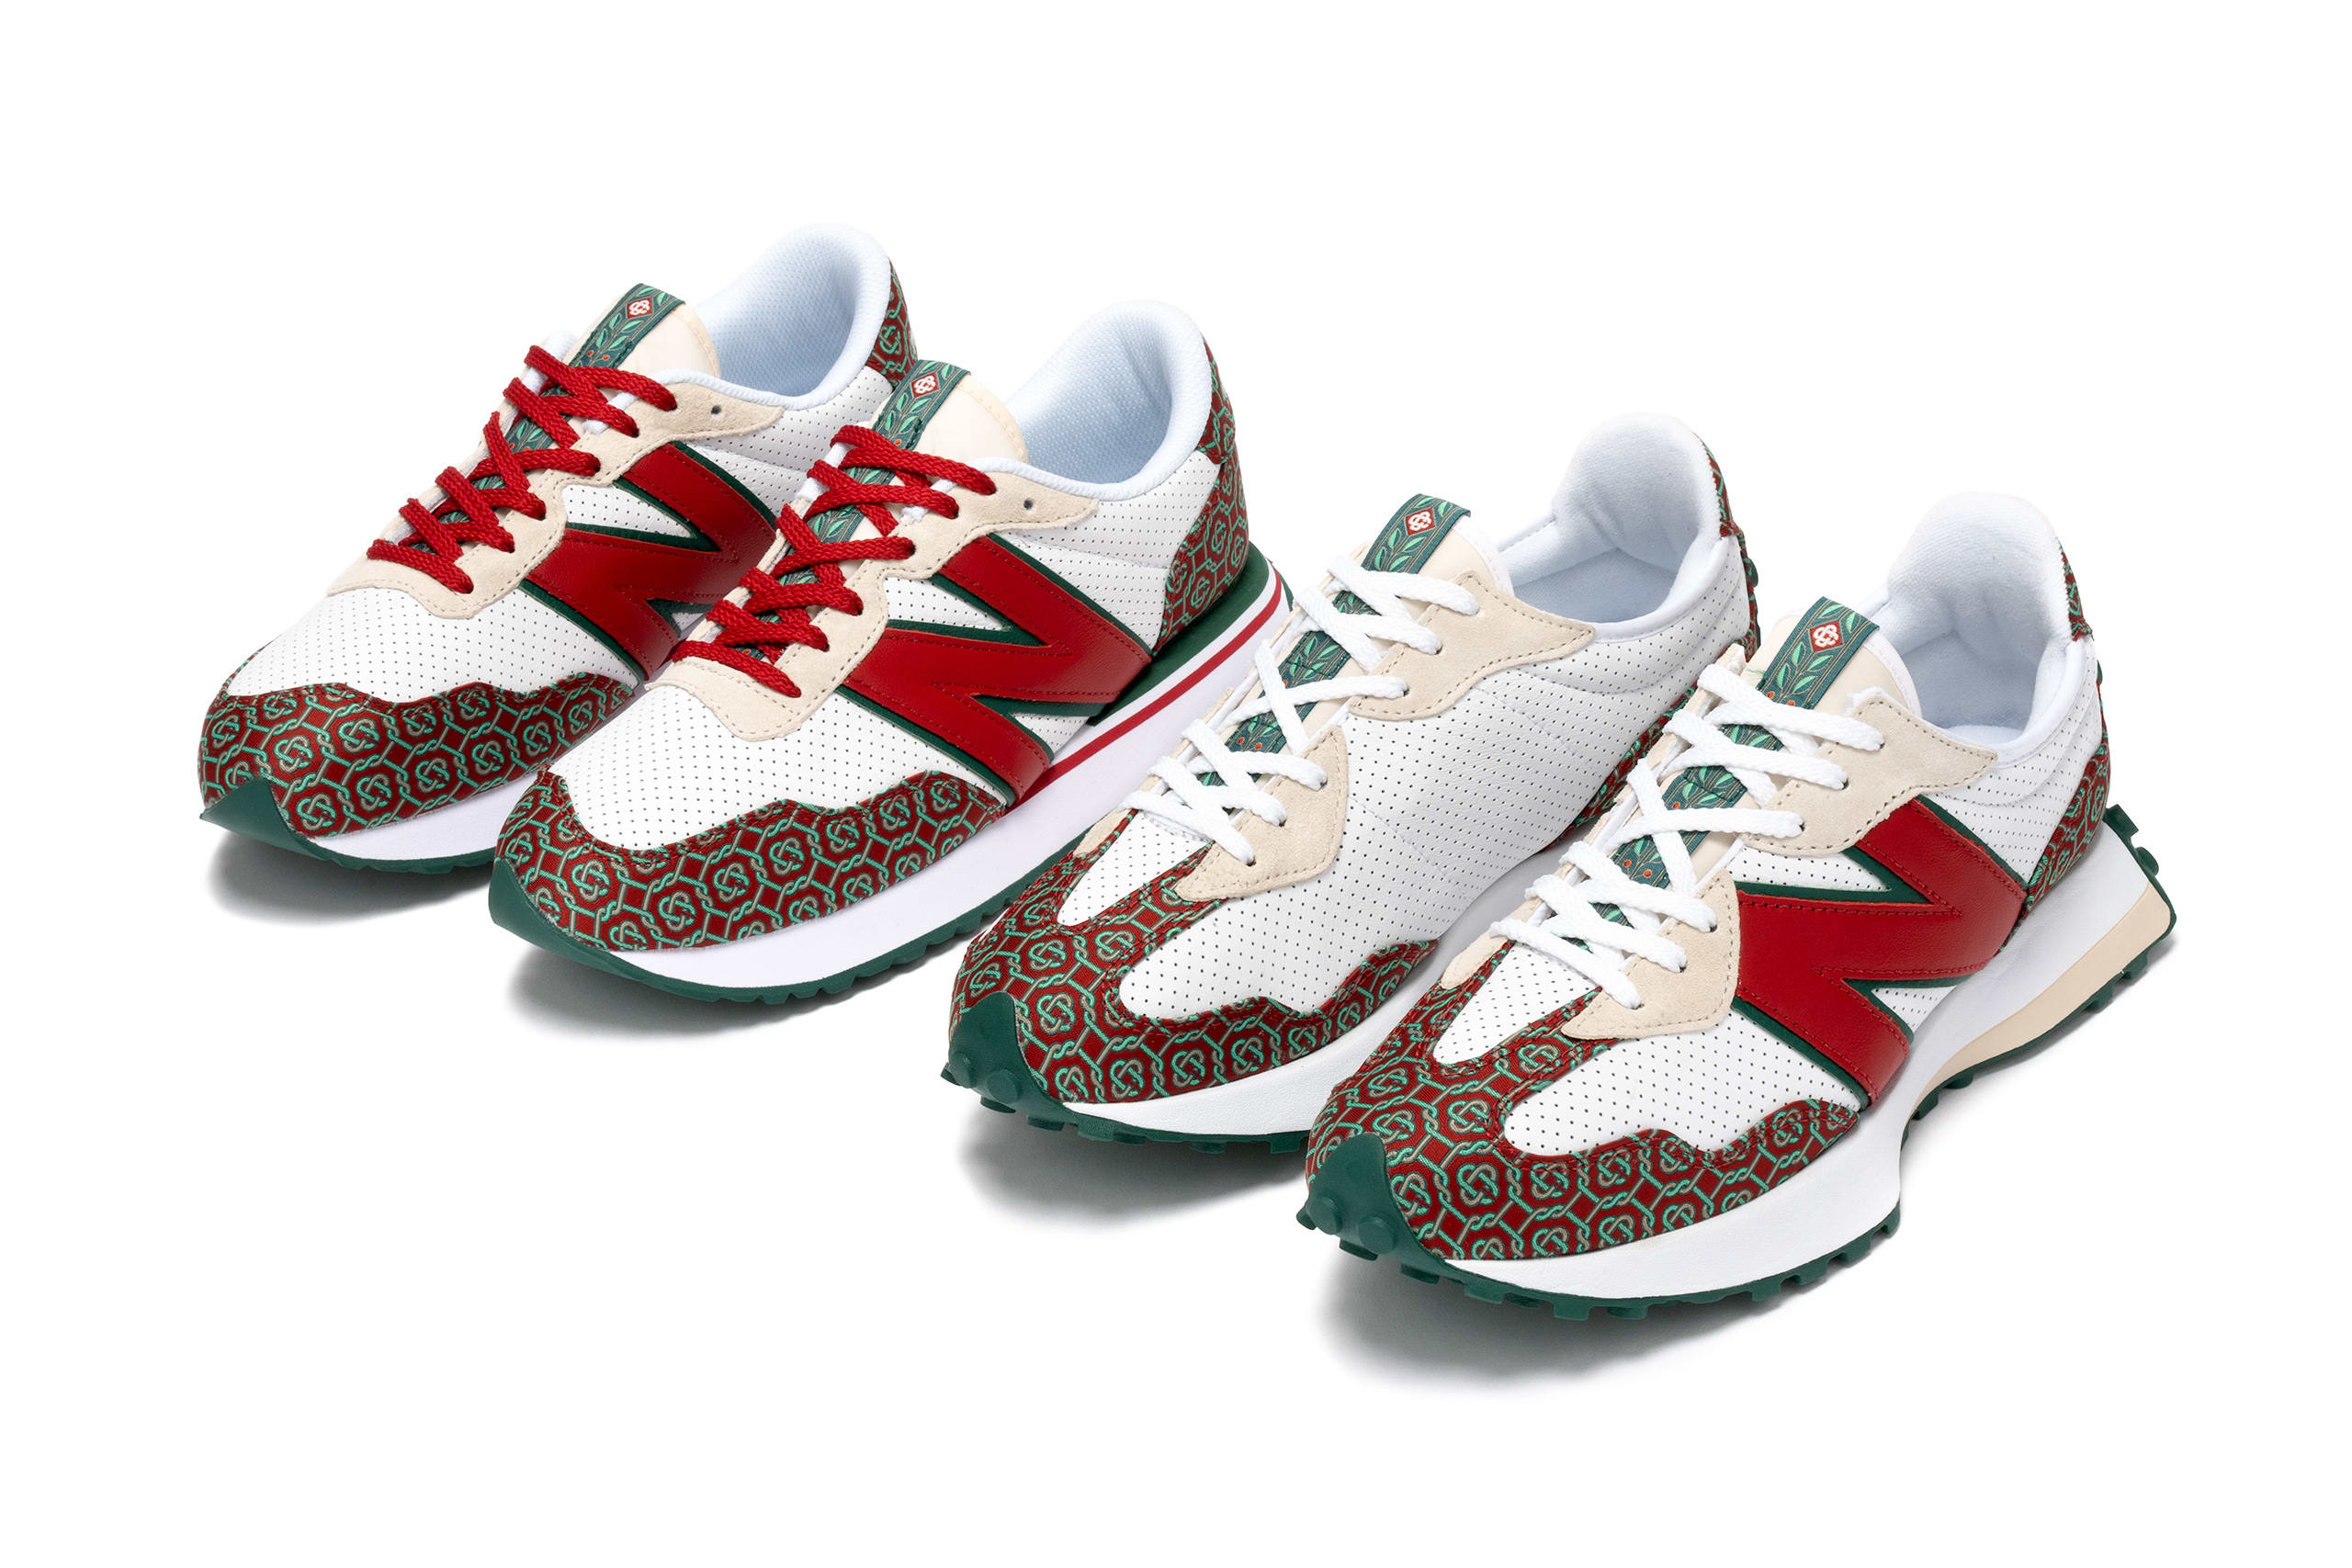 New Balance x Casablanca MS327 & MS237 Pack | Release Date: 05.28